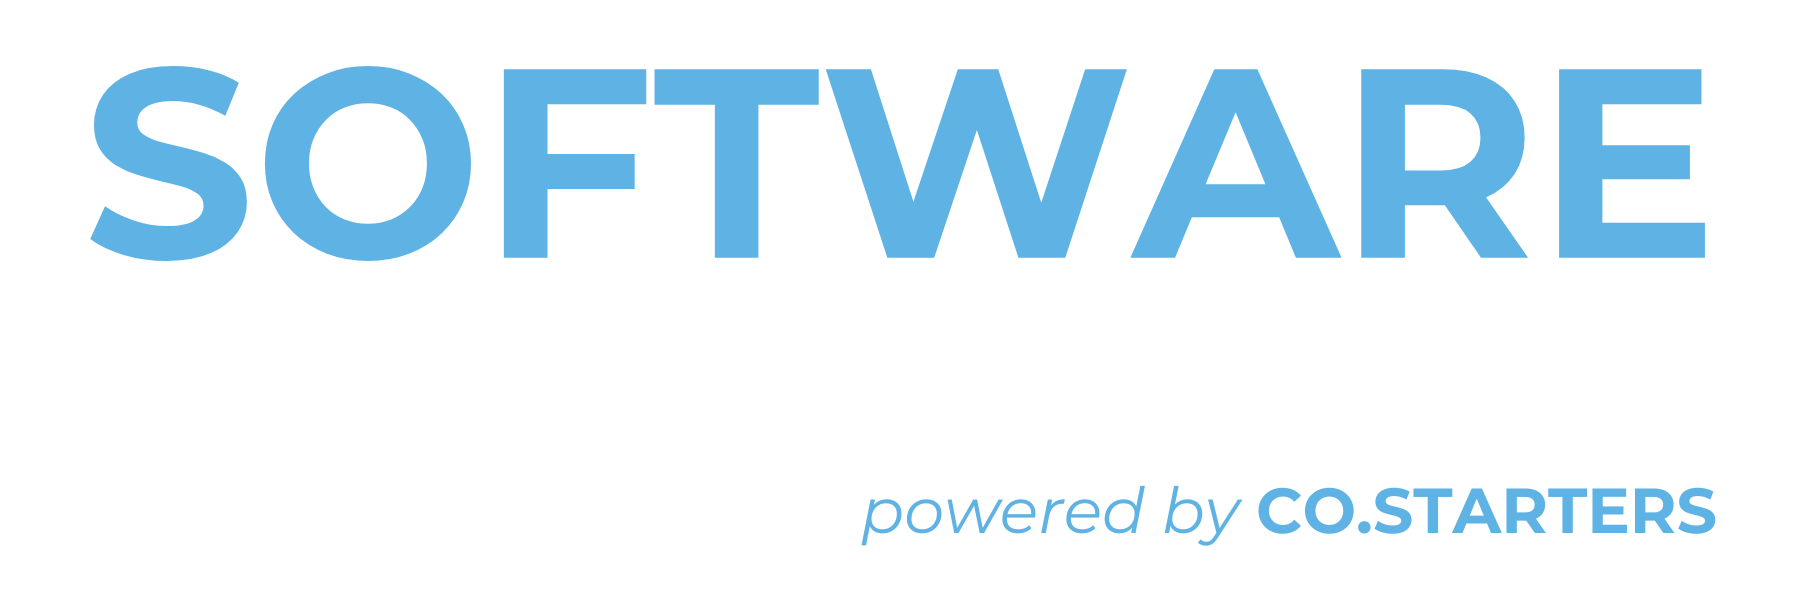 Software Accelerator - Light blue and white logo